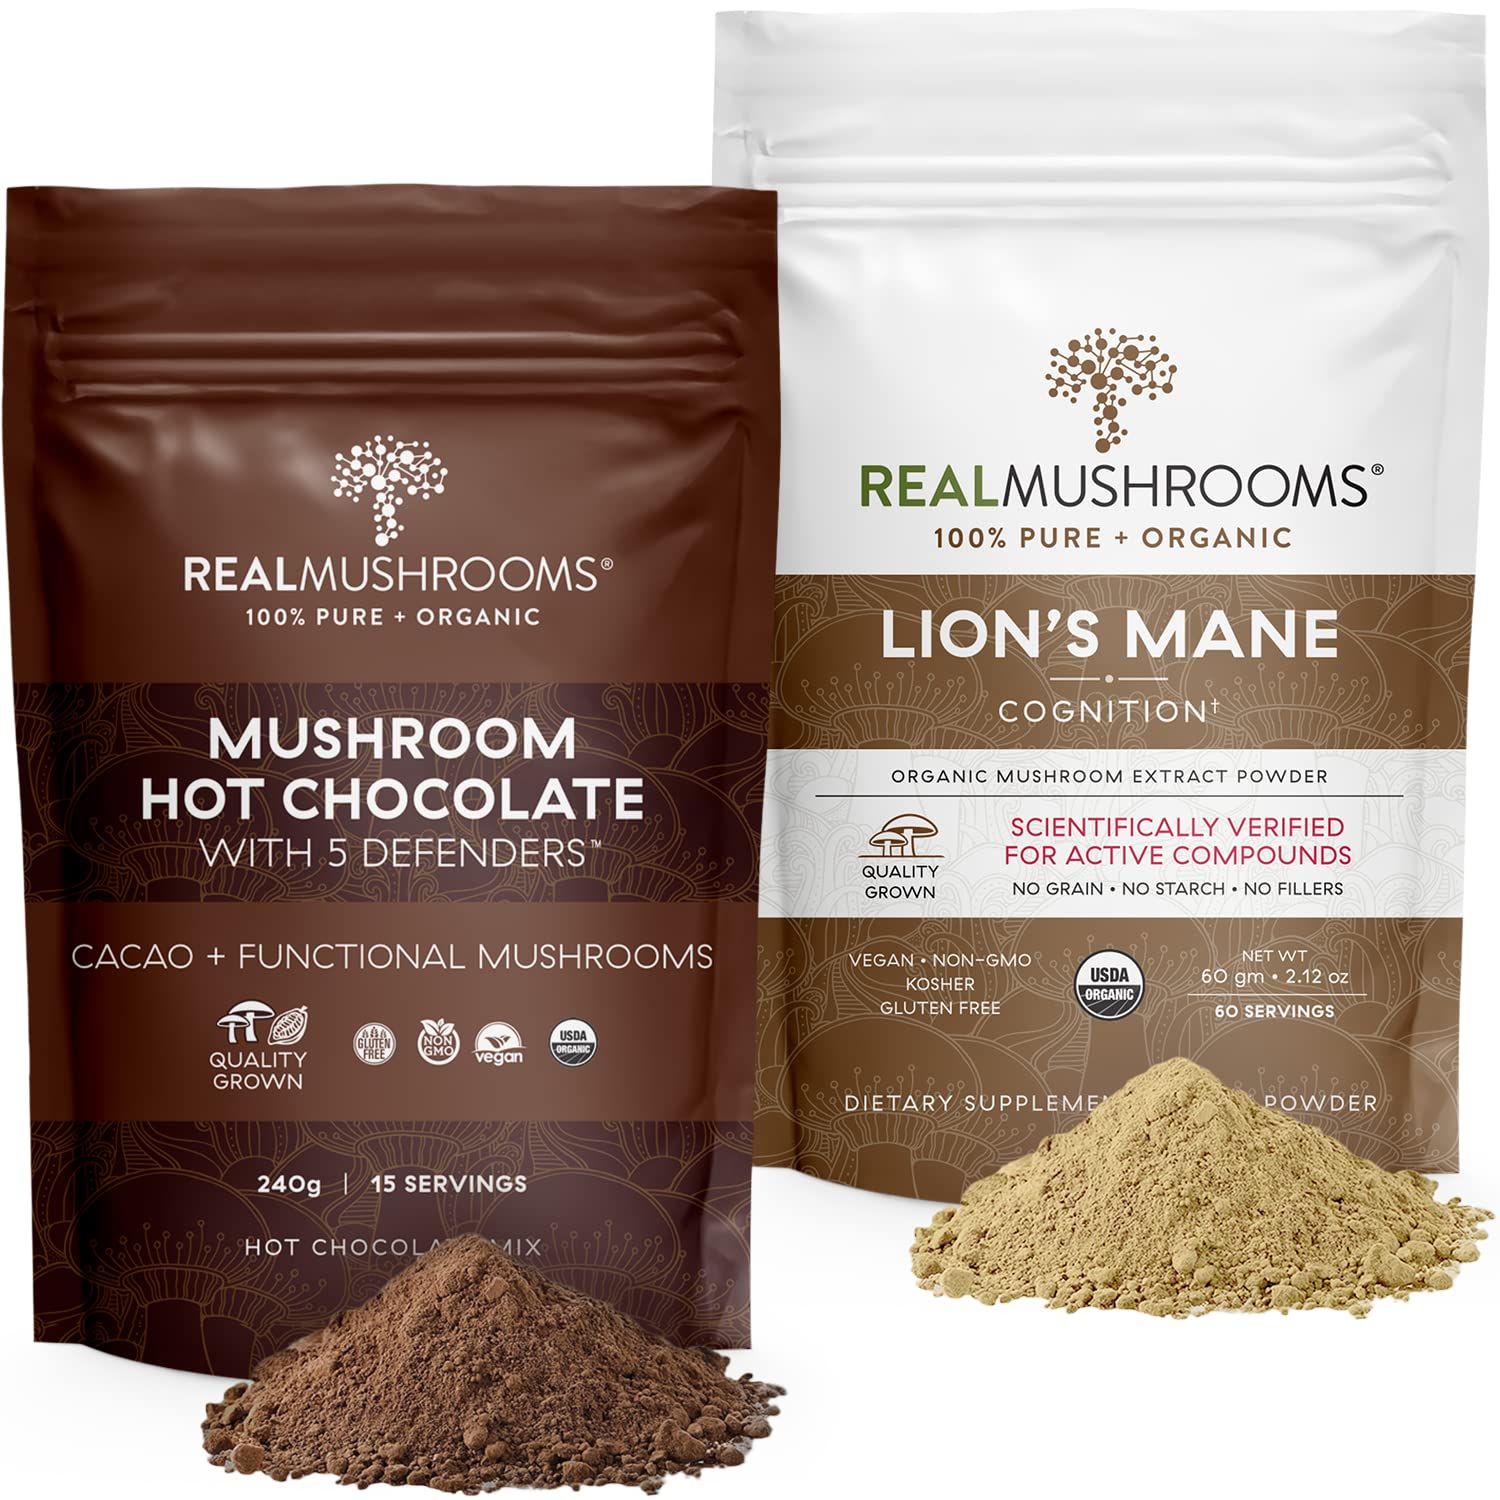 Real Mushrooms Hot Chocolate Mix (15 Servings) and Lion’s Mane (60 Servings) Powder Bundle - Mushroom Powder Supplement for Daily Immunity & Cognition Support - Gluten-Free, Non-GMO, Vegan